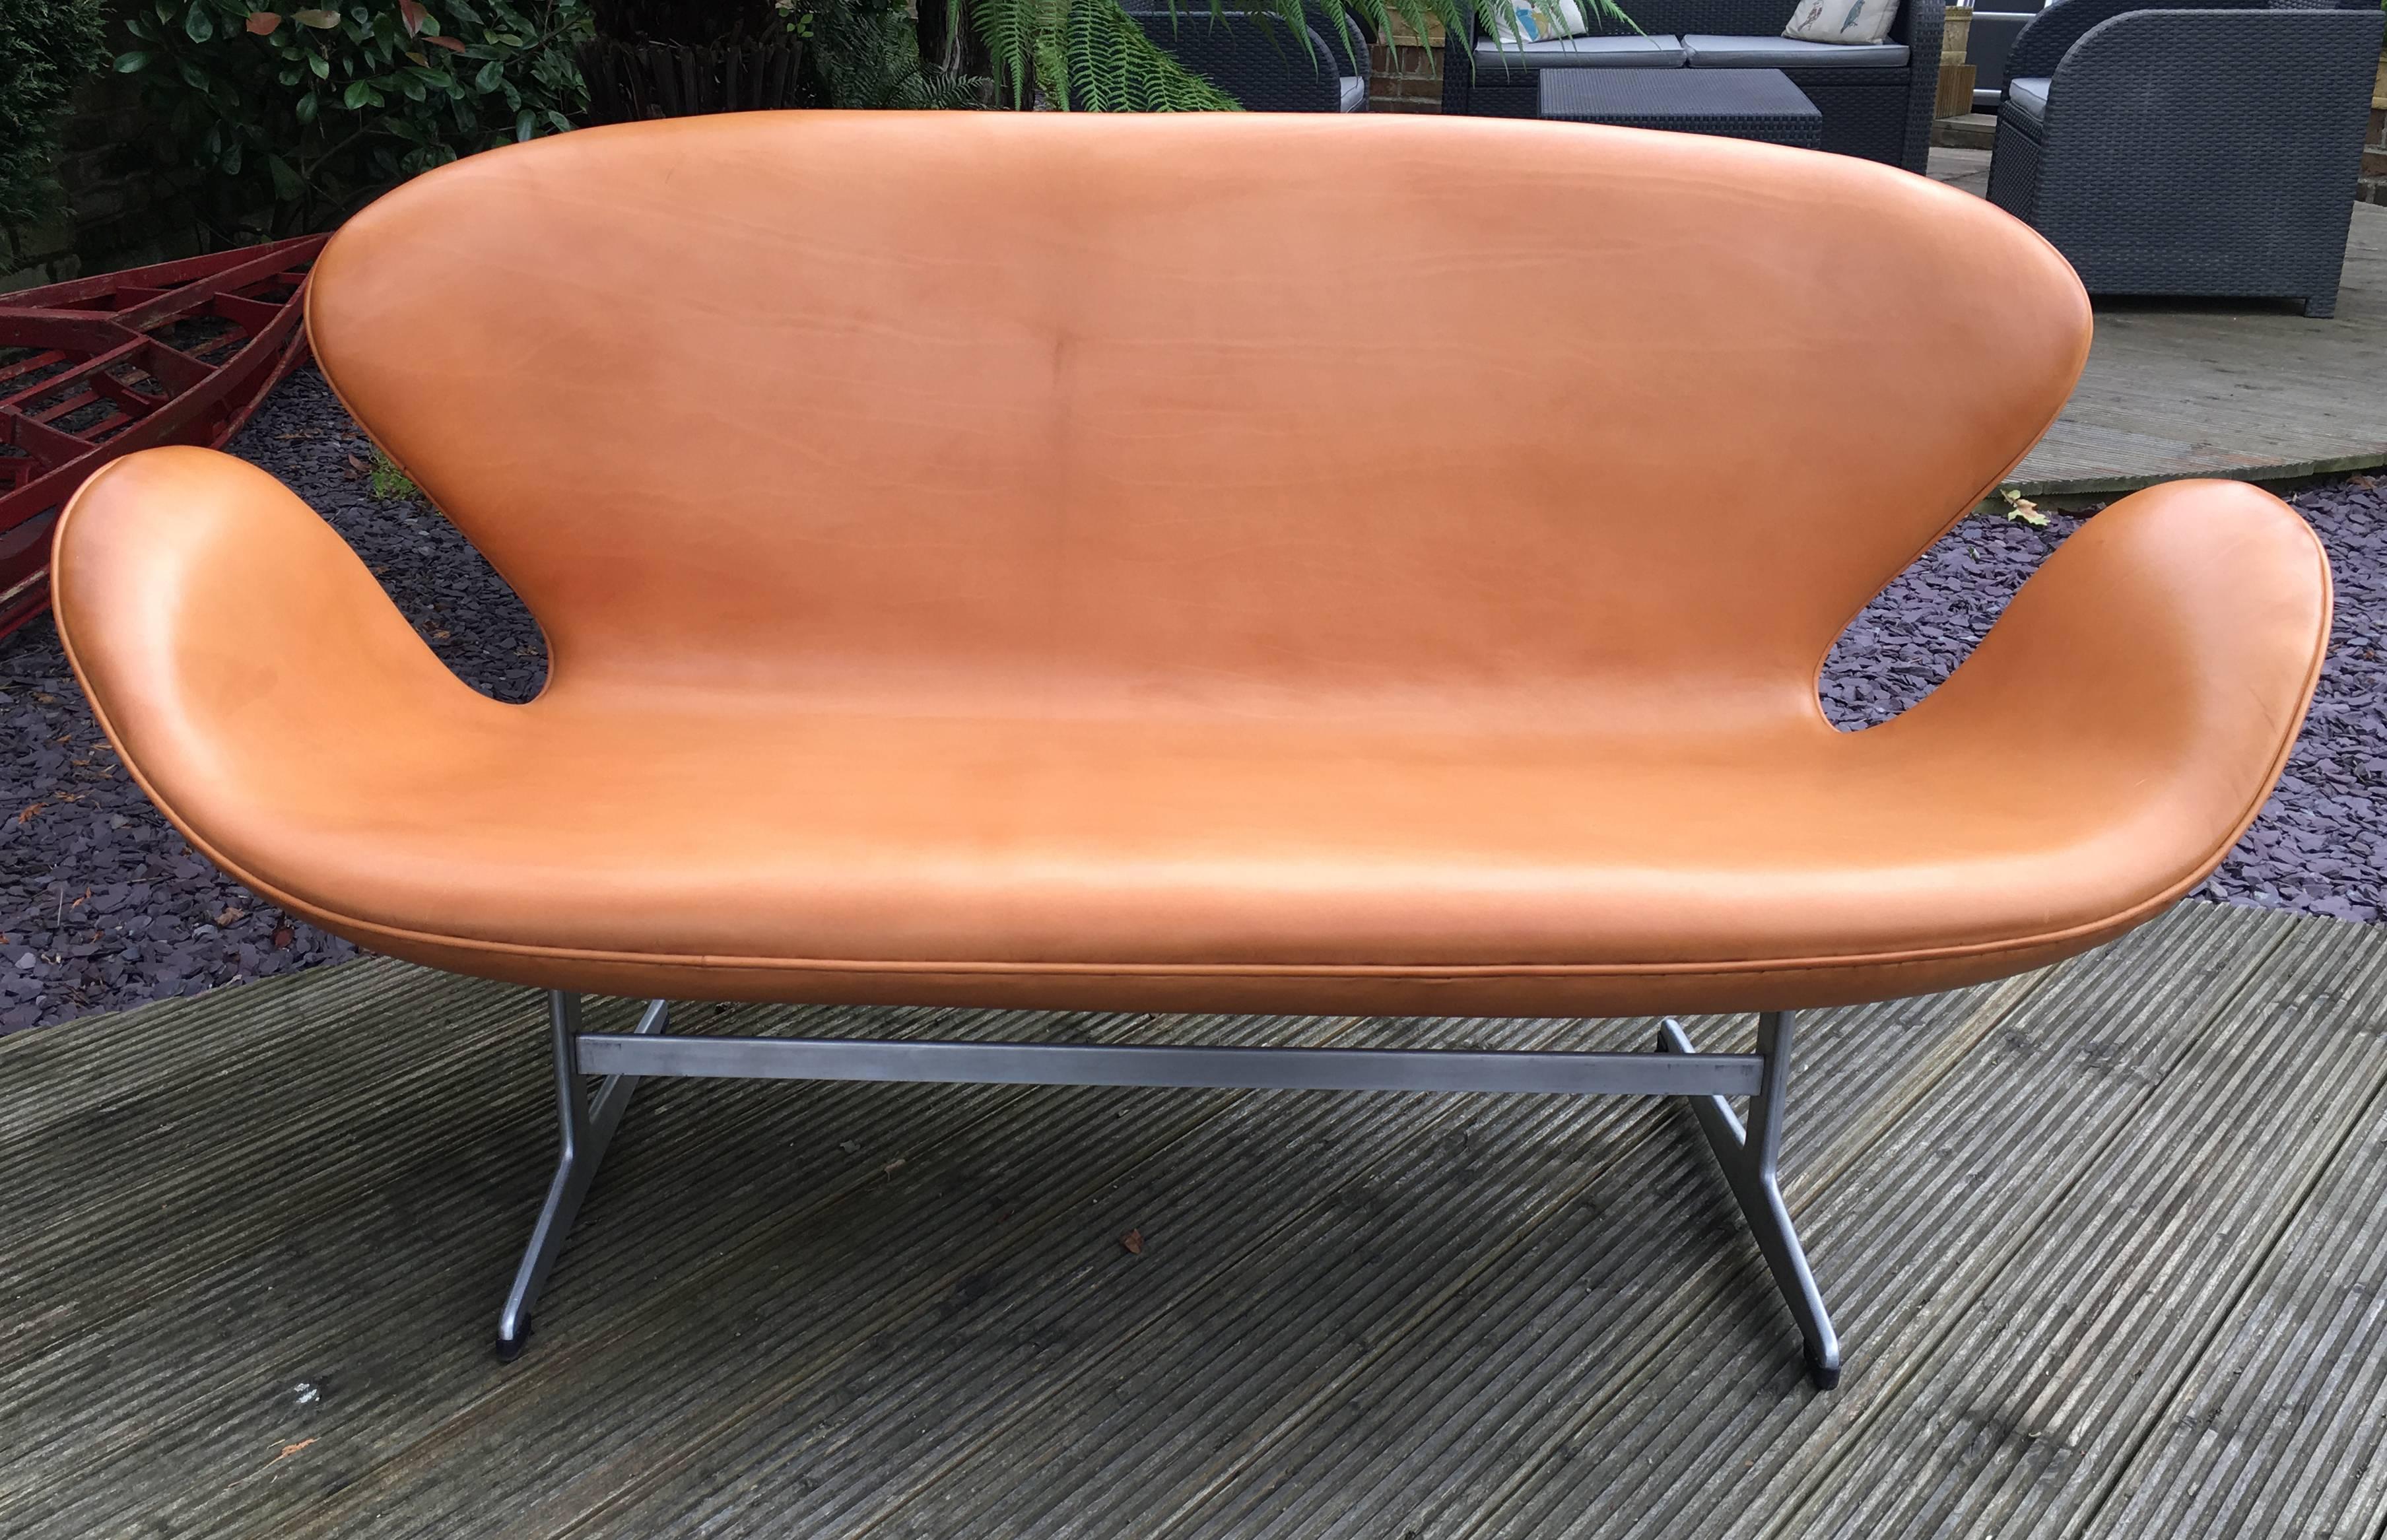 Mid-20th Century Pale Cognac Leather Swan Sofa by Arne Jacobsen for Fritz Hansen